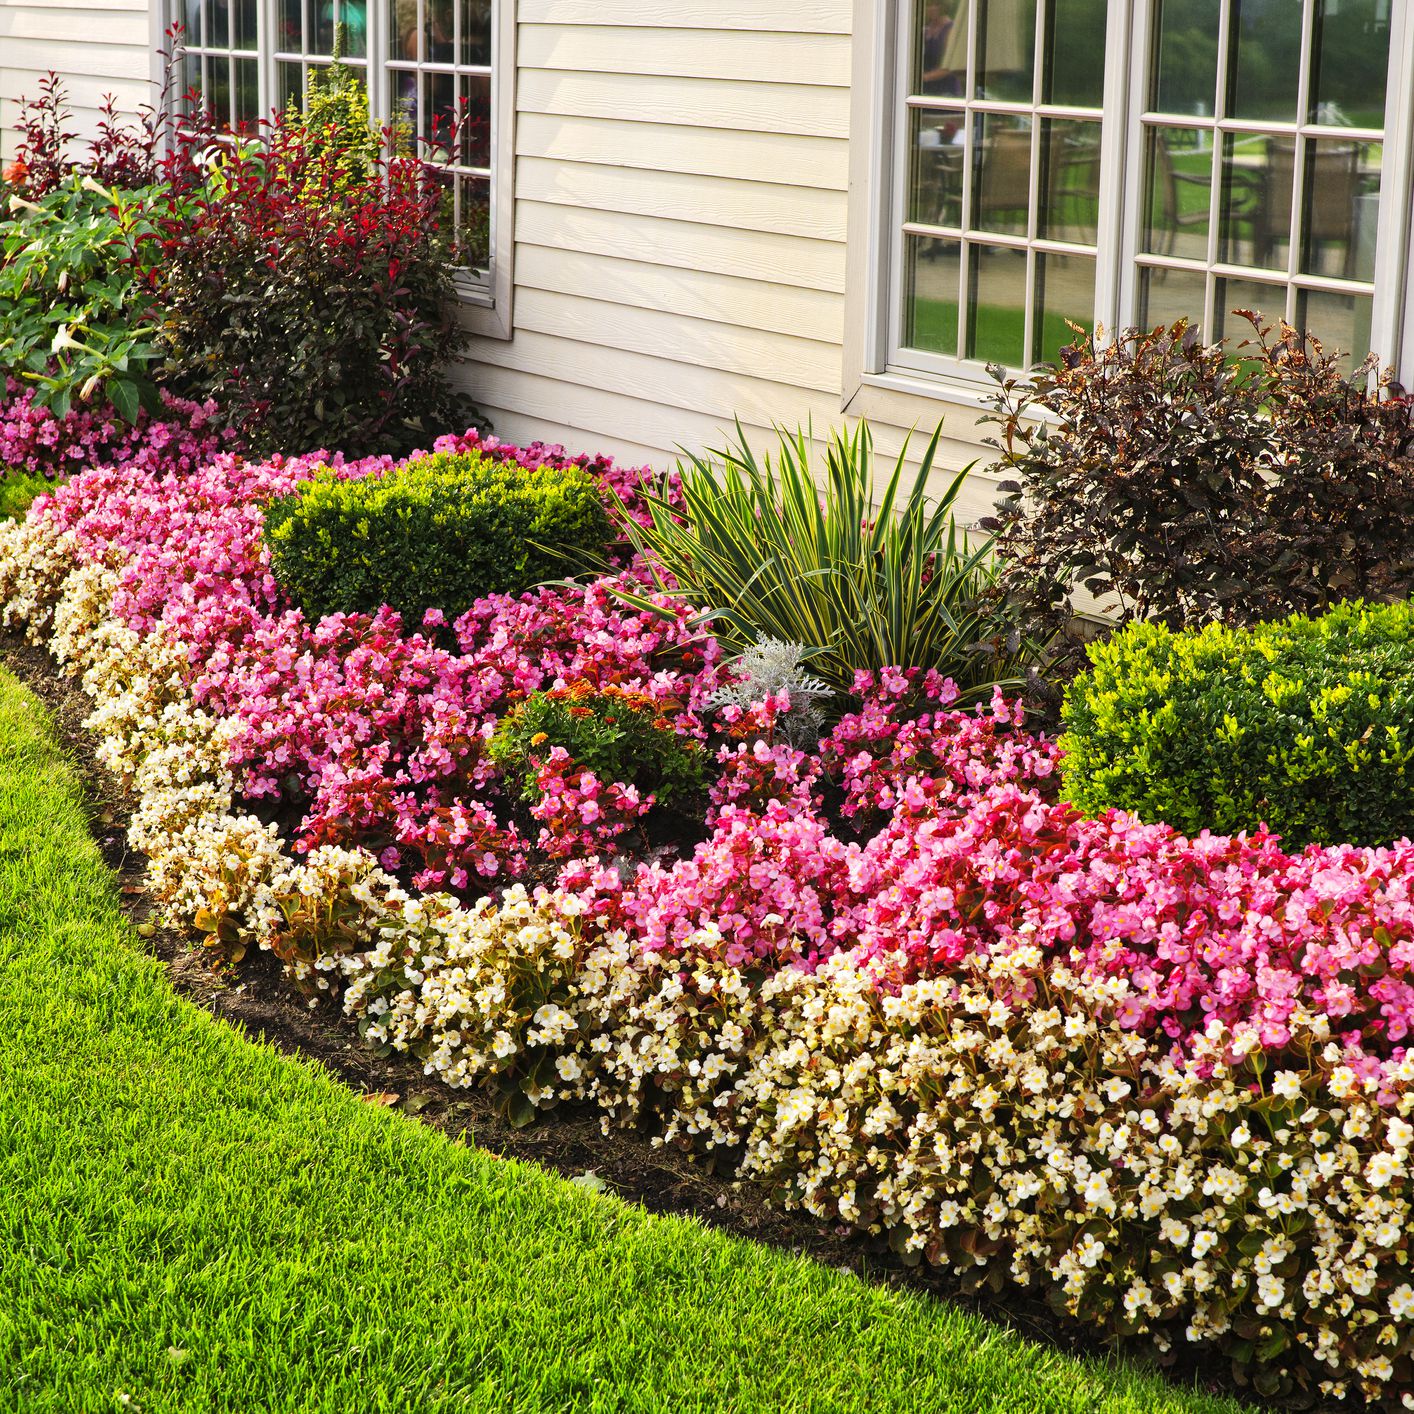 10 Flower Bed Ideas to Dress Up Your Landscape Edging